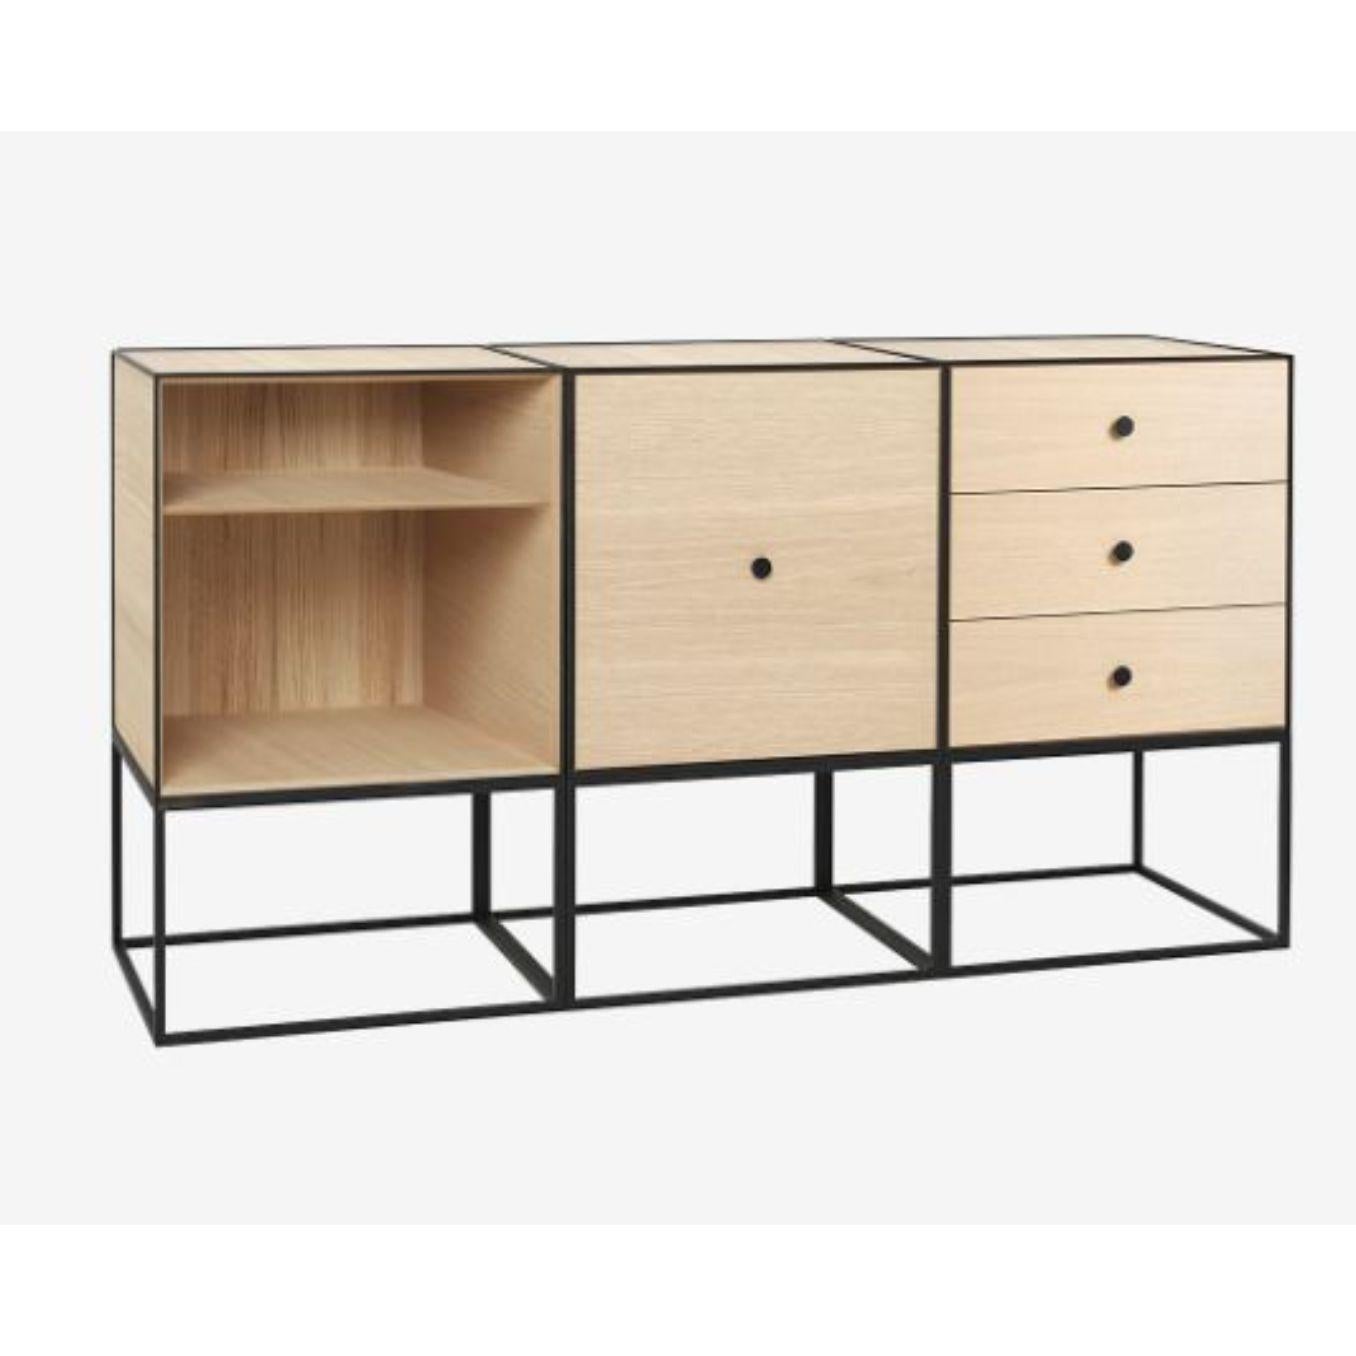 49 oak frame sideboard trio by Lassen.
Dimensions: D 147 x W 42 x H 77 cm 
Materials: Finér, melamin, melamine, metal, veneer, oak
Also available in different colors and dimensions. 
Weight: 88 kg

By Lassen is a Danish design brand focused on